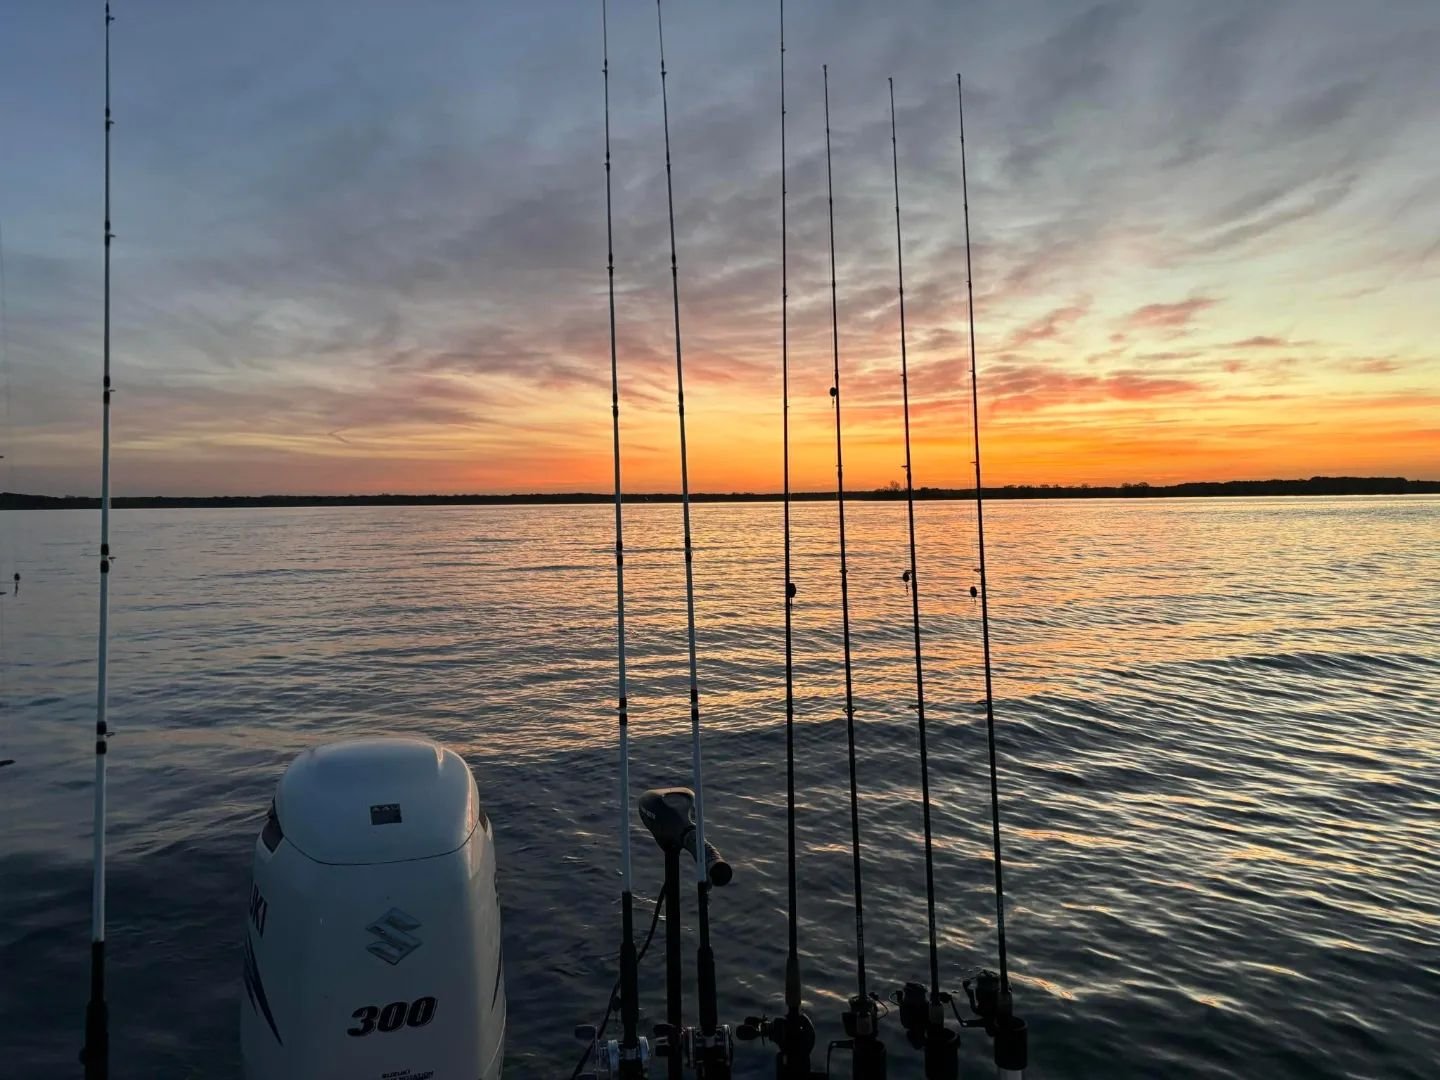 The mornings are early, but it's hard to complain when this is the view and there's a good day of fishing to look forward to! Thank you to Zach for sending this photo from our trip last week. 

#GoodTimesFishingCo #LakeTexoma #OklahomaFishing #Oklaho